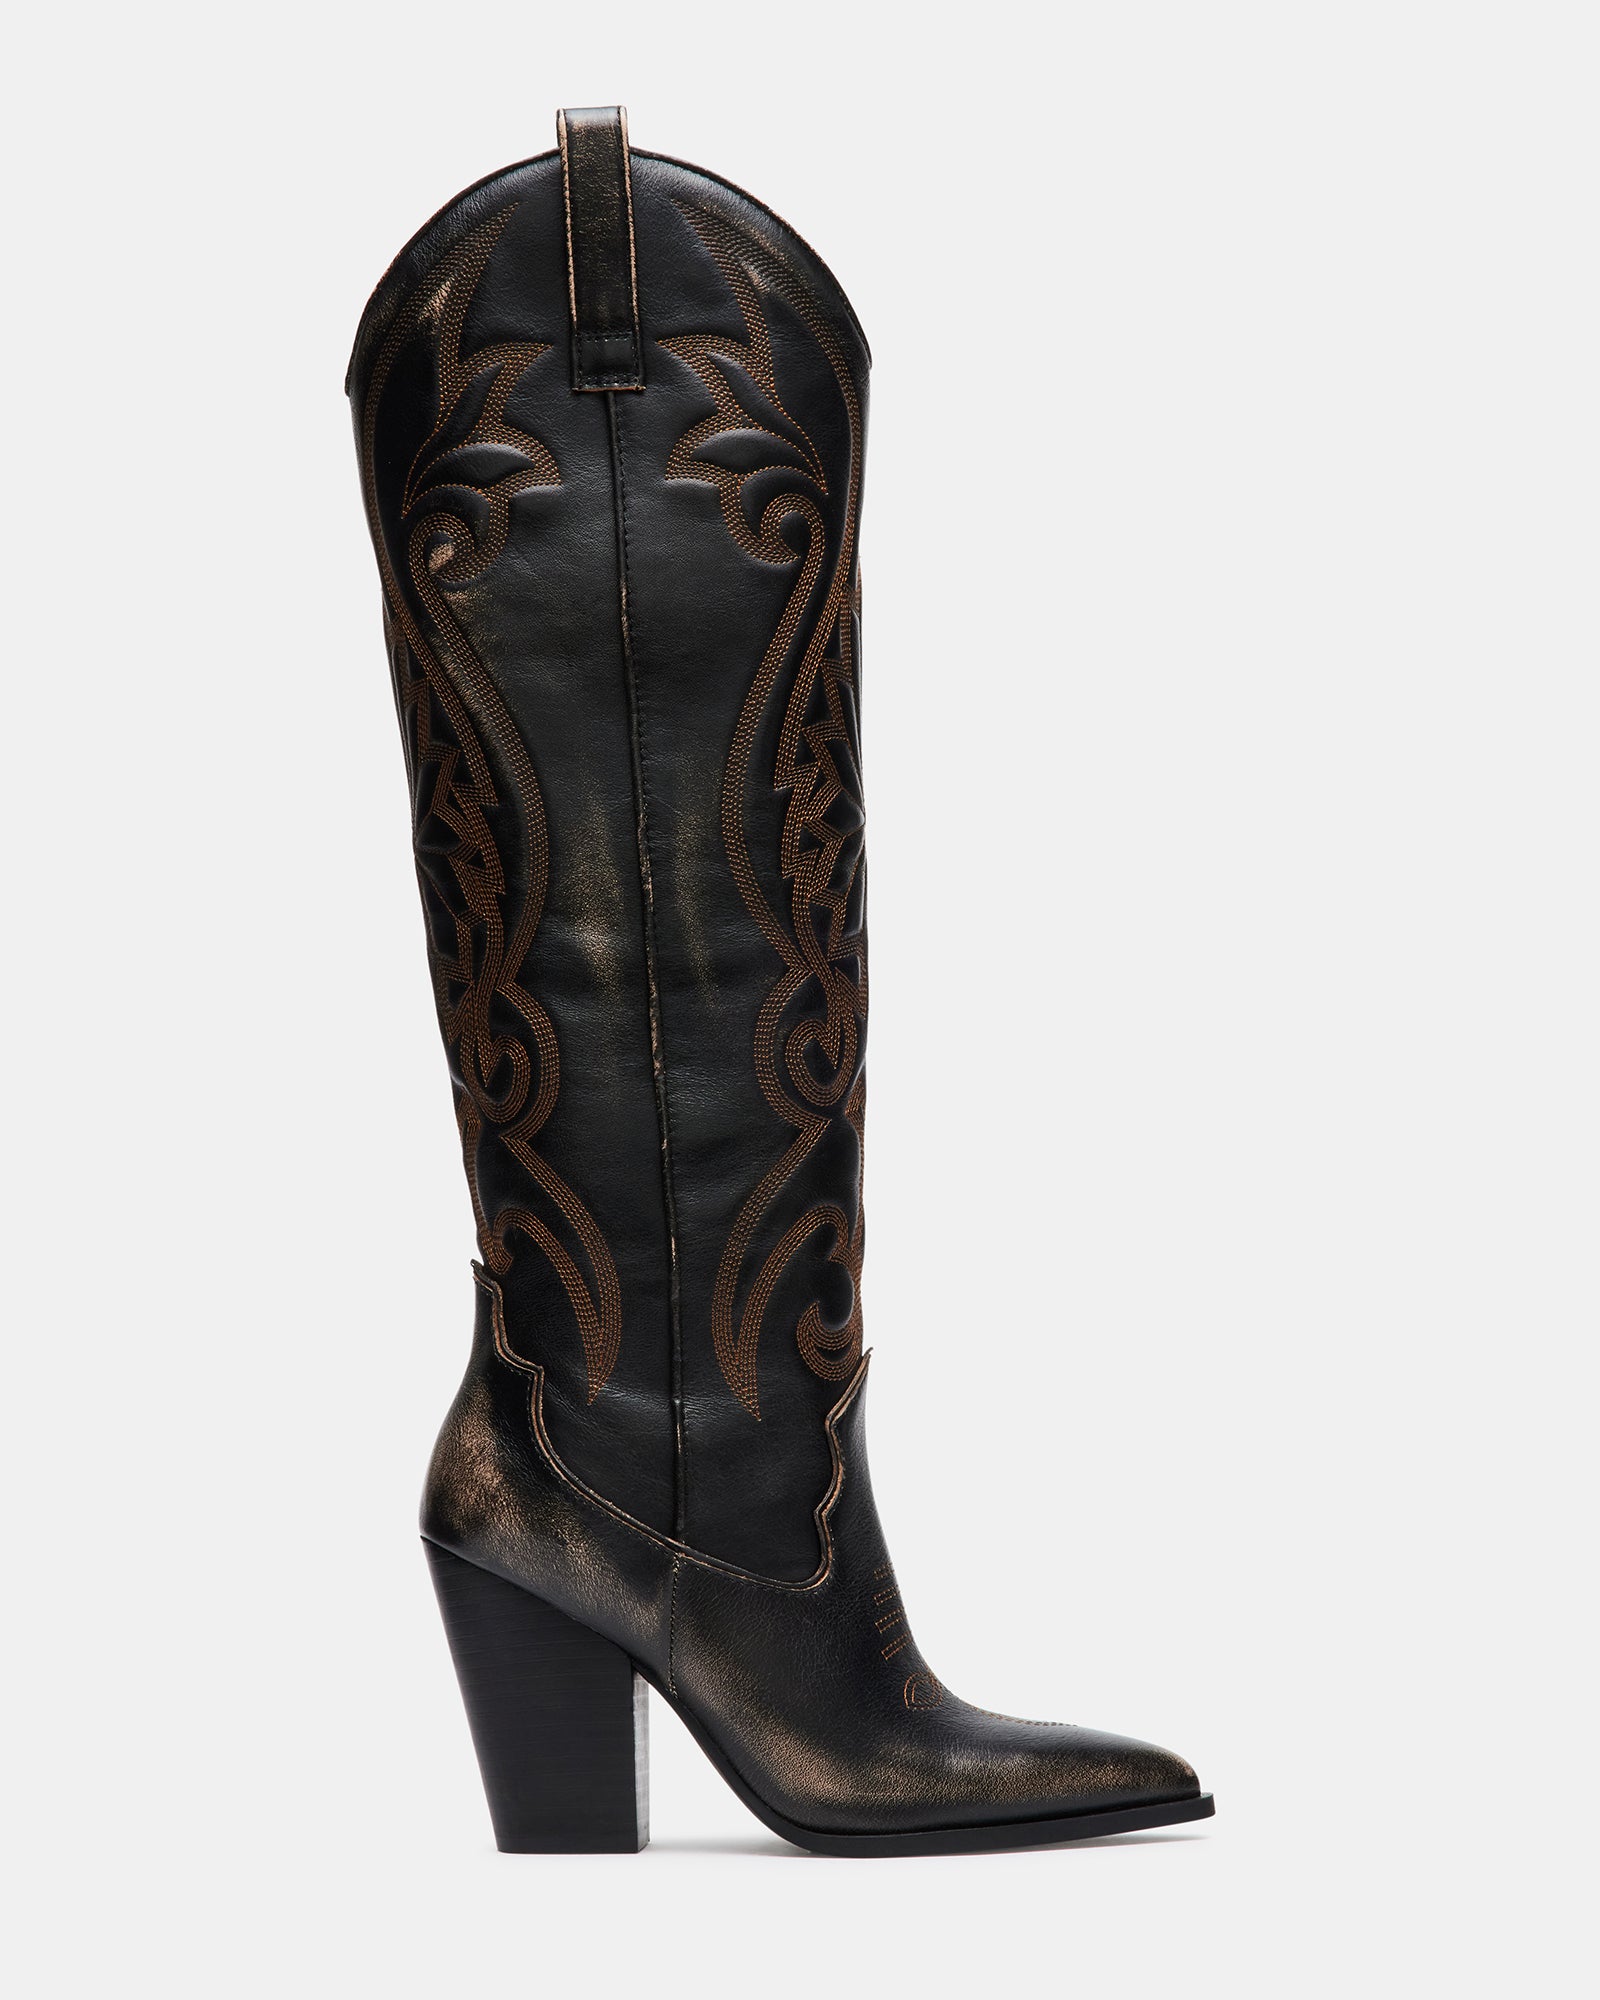 The Western Edit | Cowboy & Cowgirl Boots for Men & Women – Steve